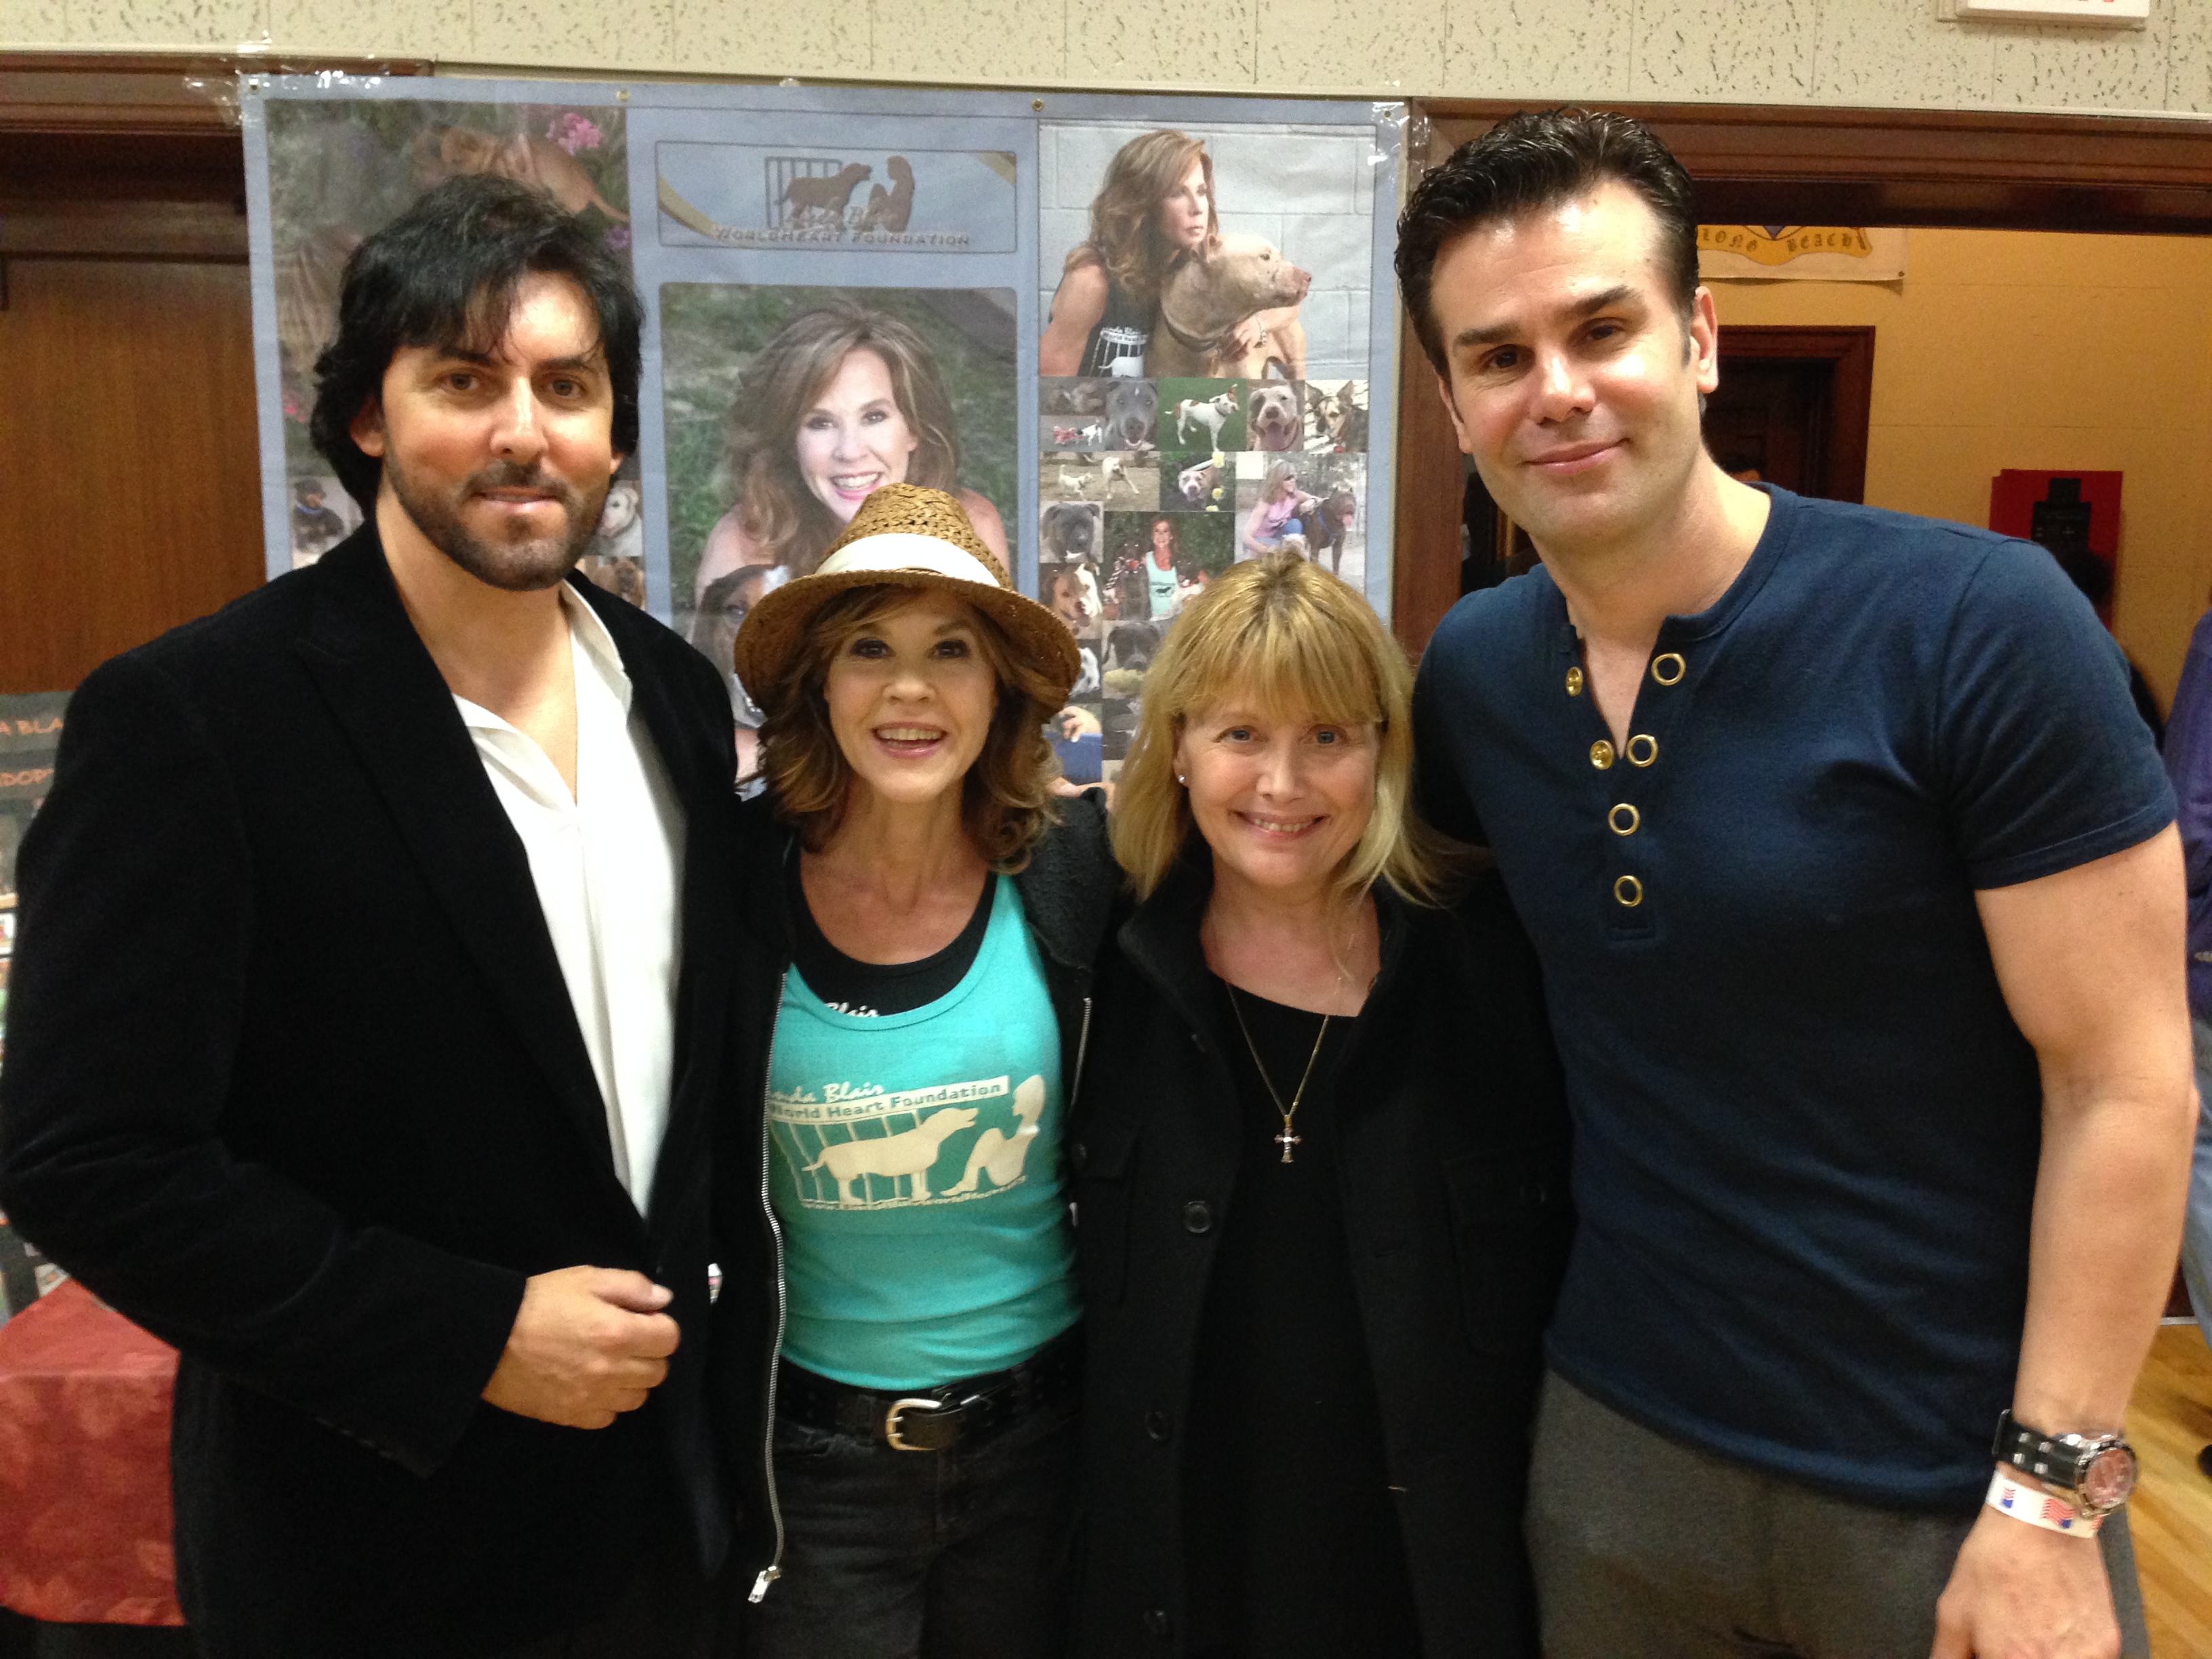 Chris Gilmore with Writer/Director Sergio Candido, Actress Linda Blair, and production partner Robert Burton for up and coming film.